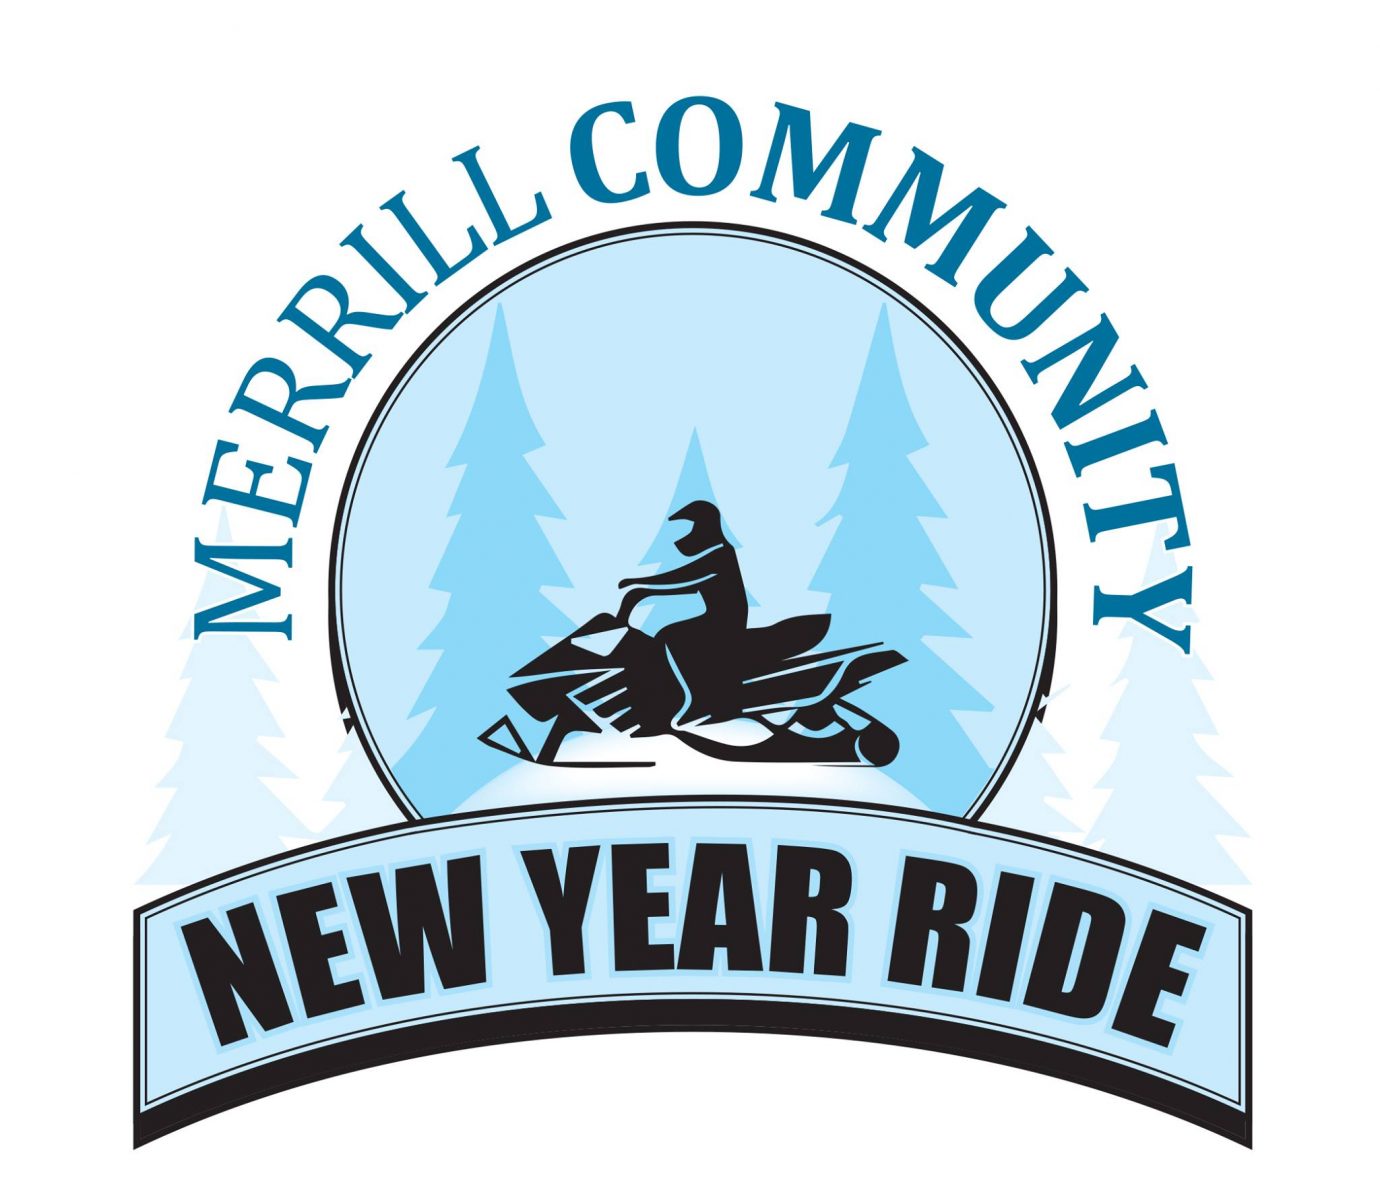 New Year Ride announces 2019 Poker Run in support of local veterans